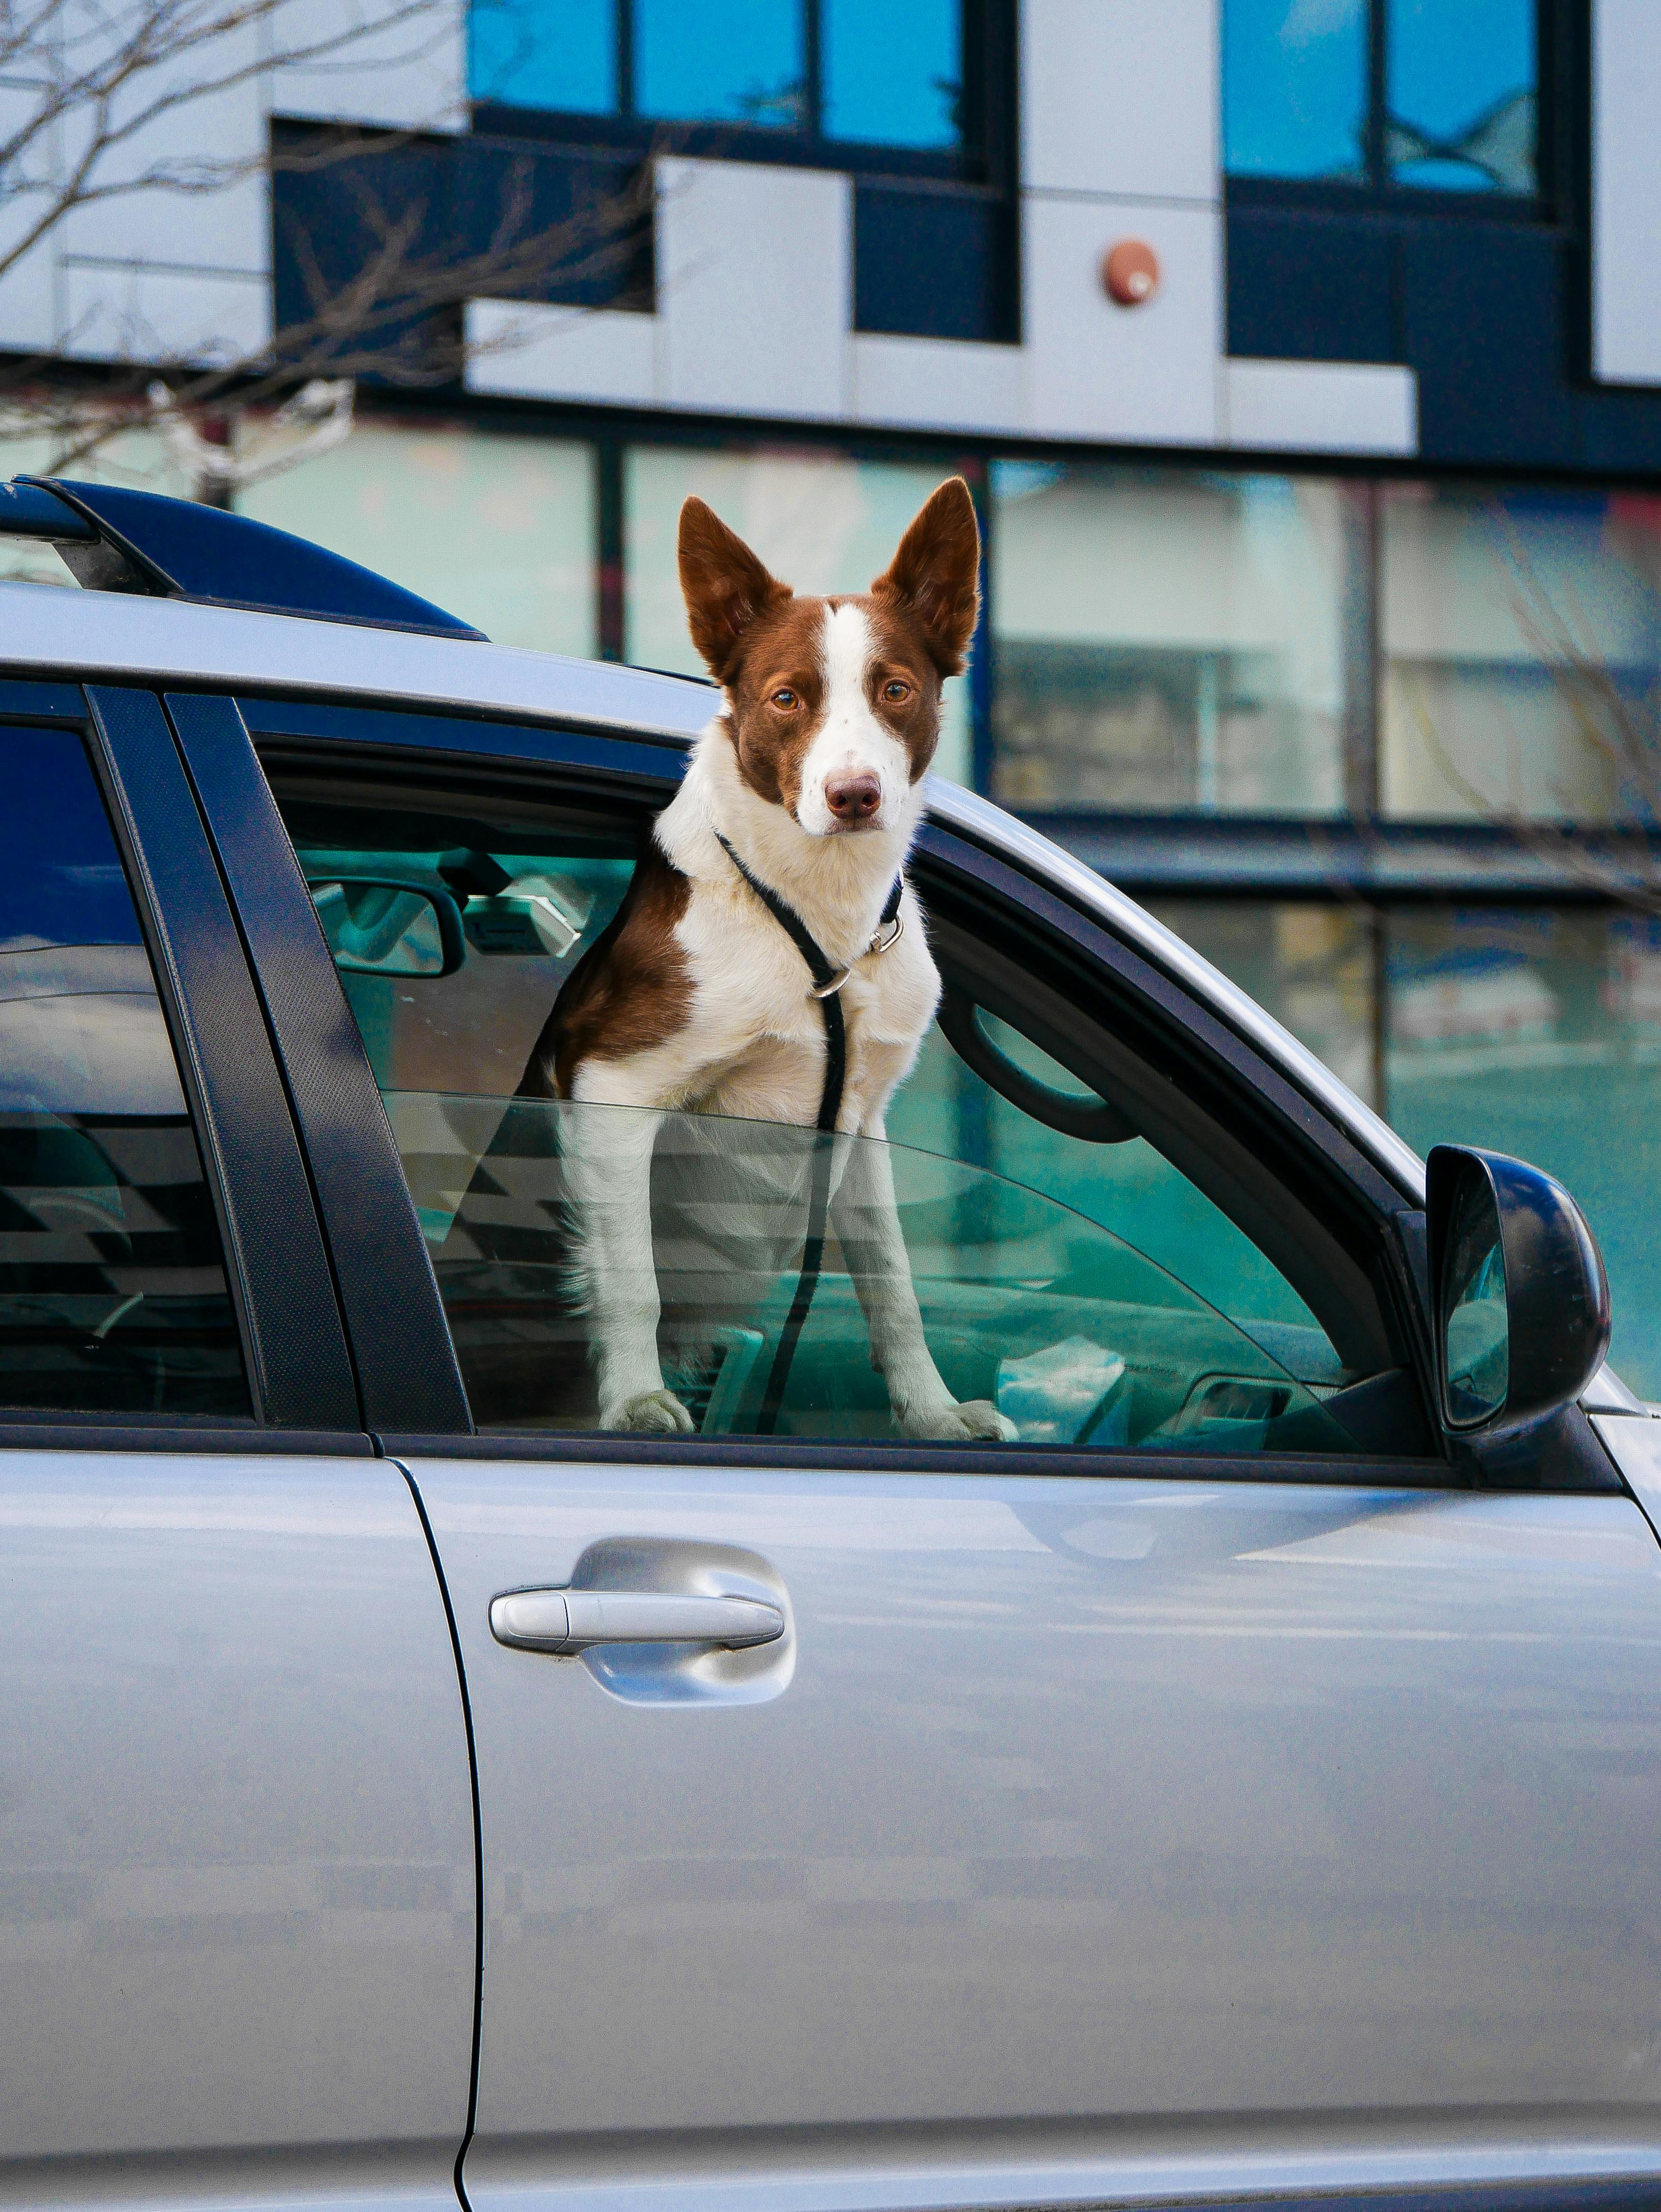 A white dog with brown patches sticks their upper body out of a grey vehicle's window.